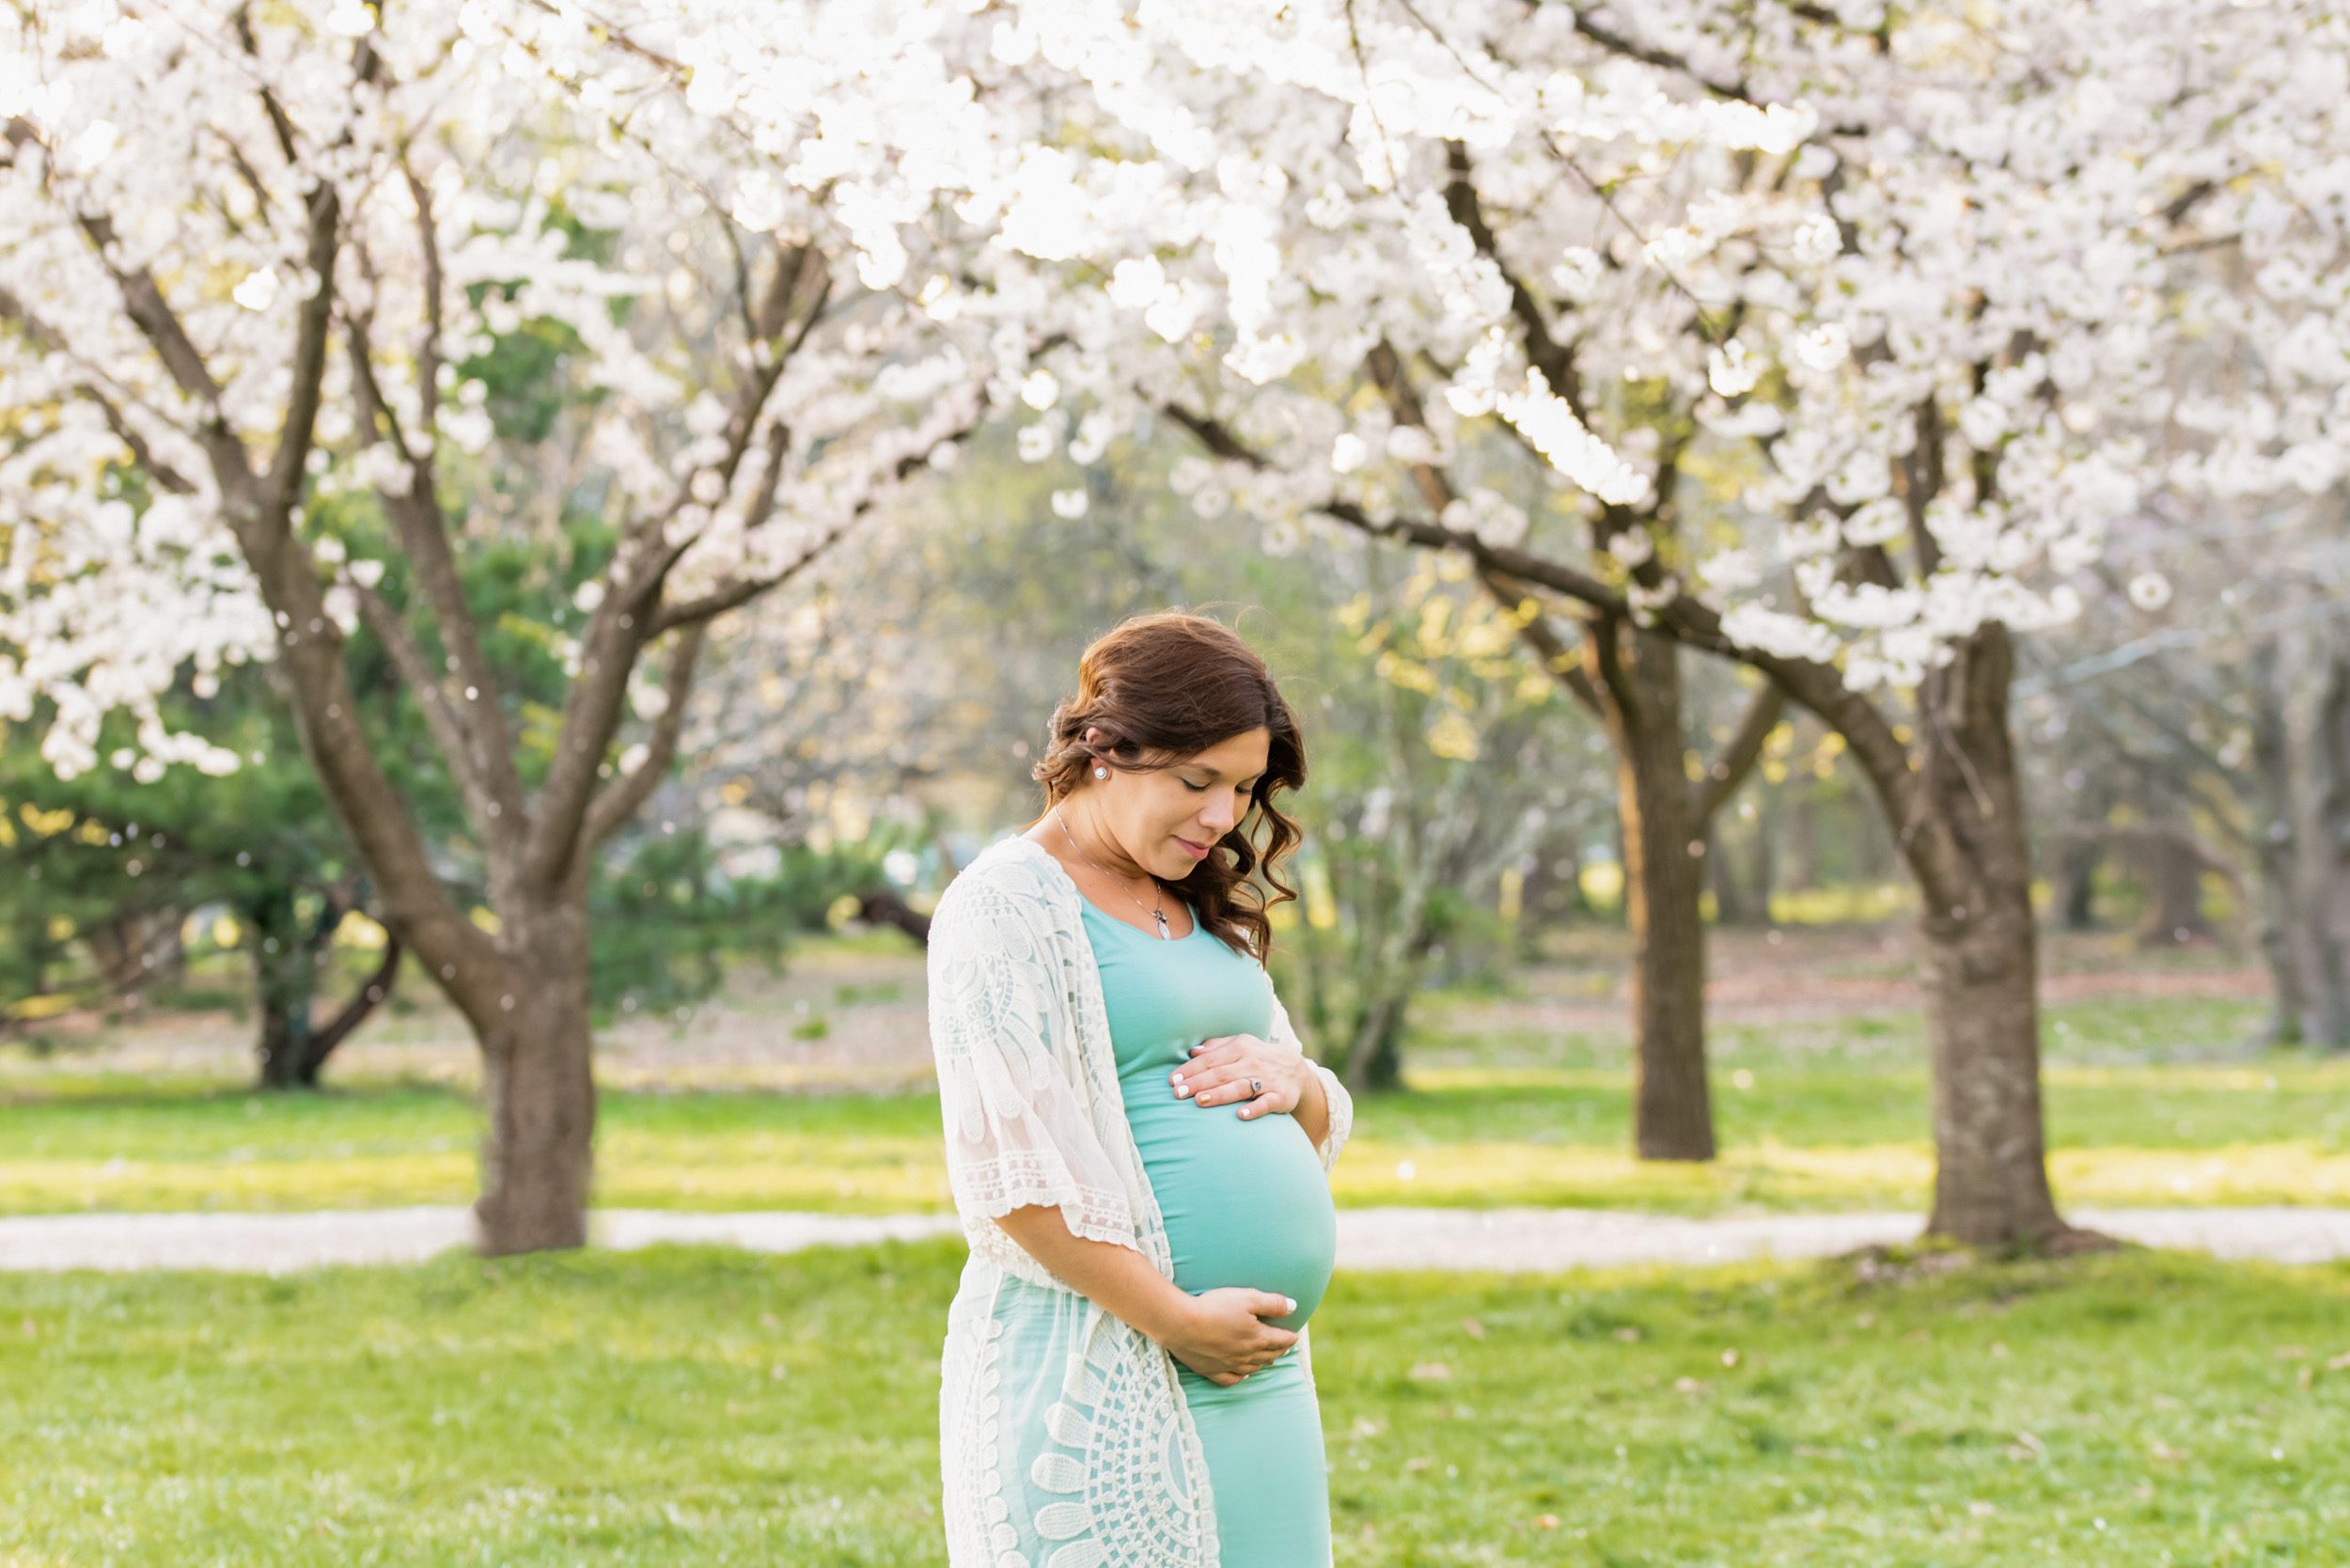 Expecting mother in an aqua dress smiling down at her belly with cherry blossom trees in the background during a maternity photo session